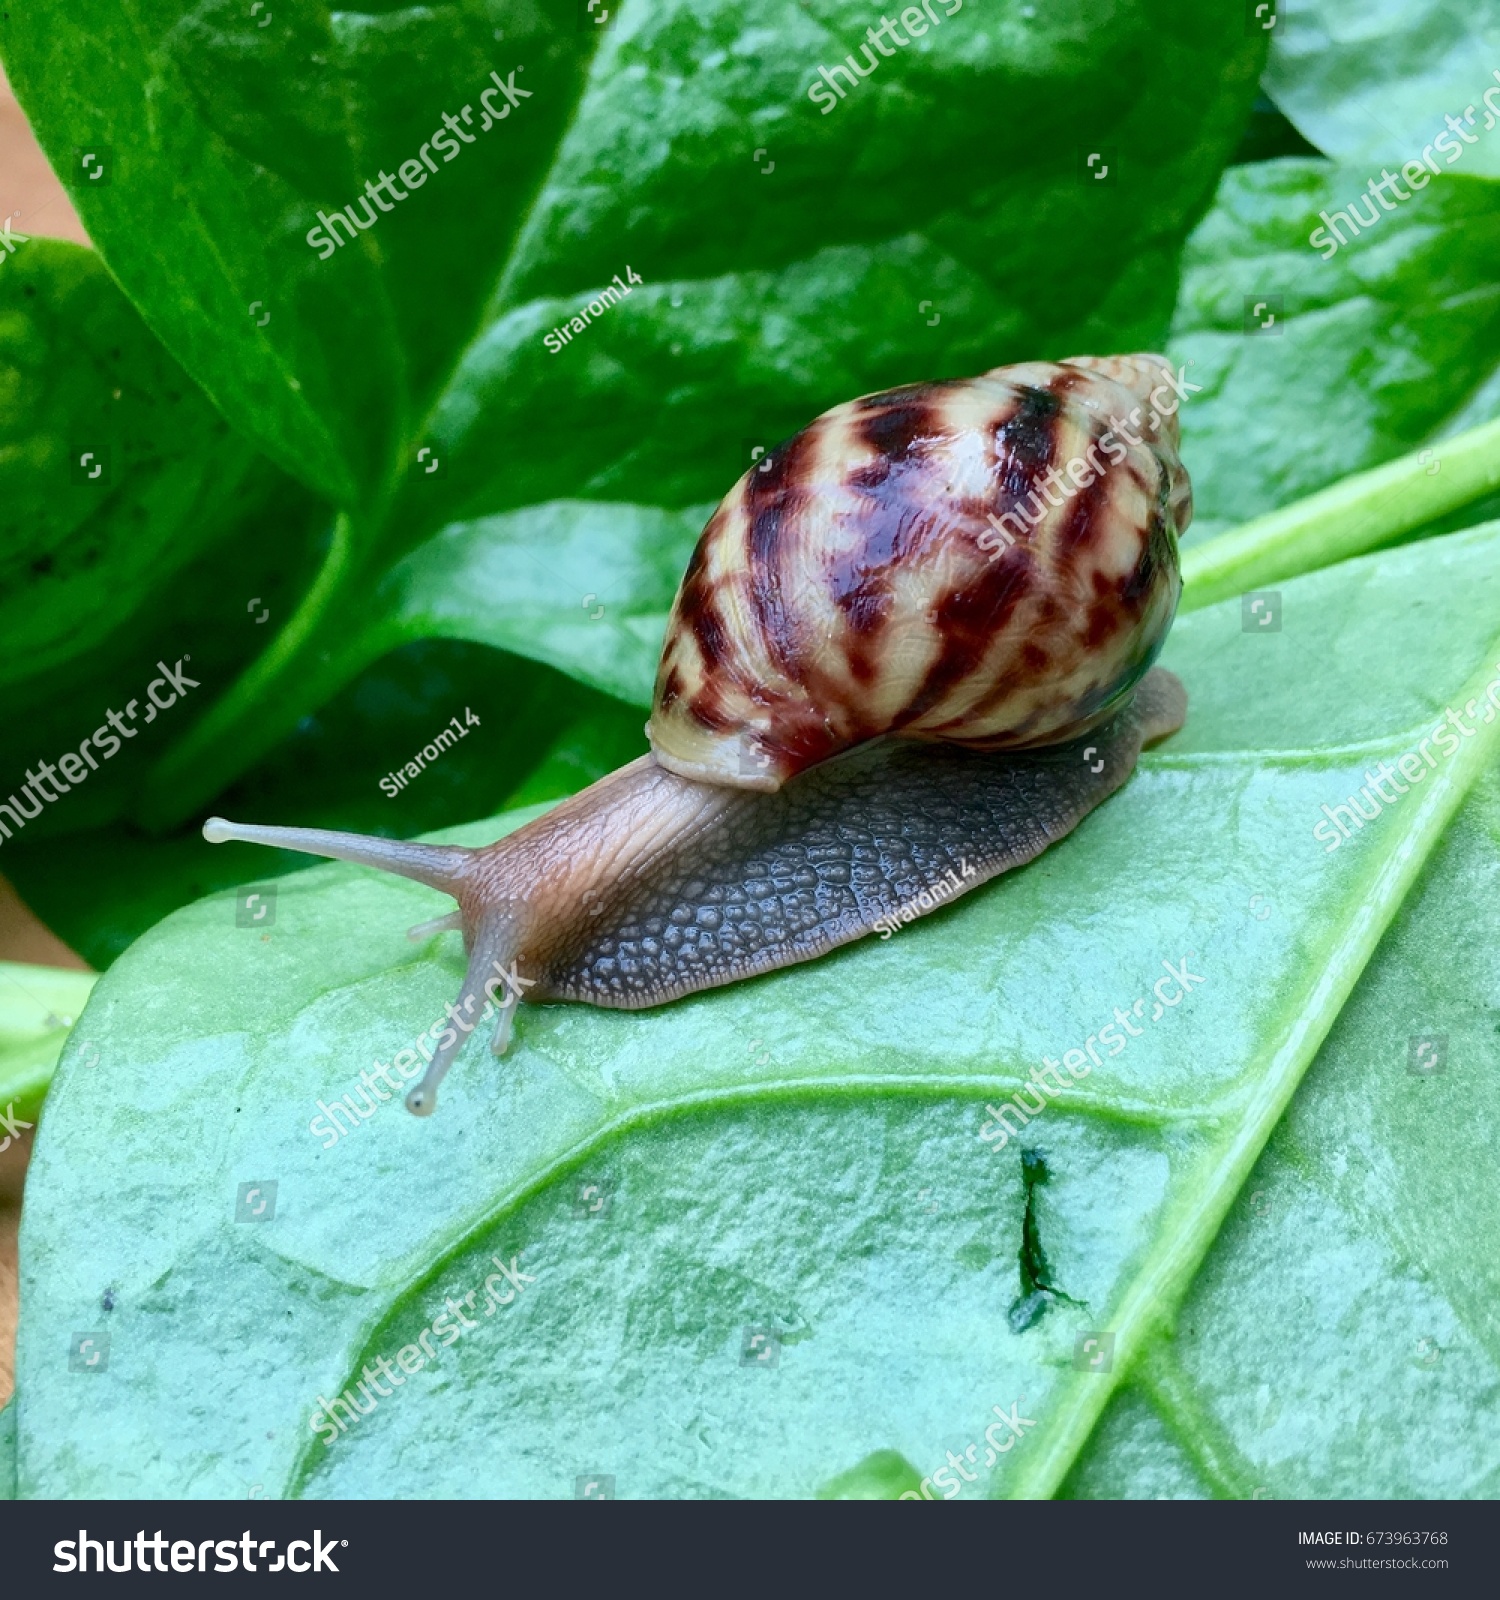 Snail Green Leaves Natural Garden Asia Stock Photo (Royalty Free ...